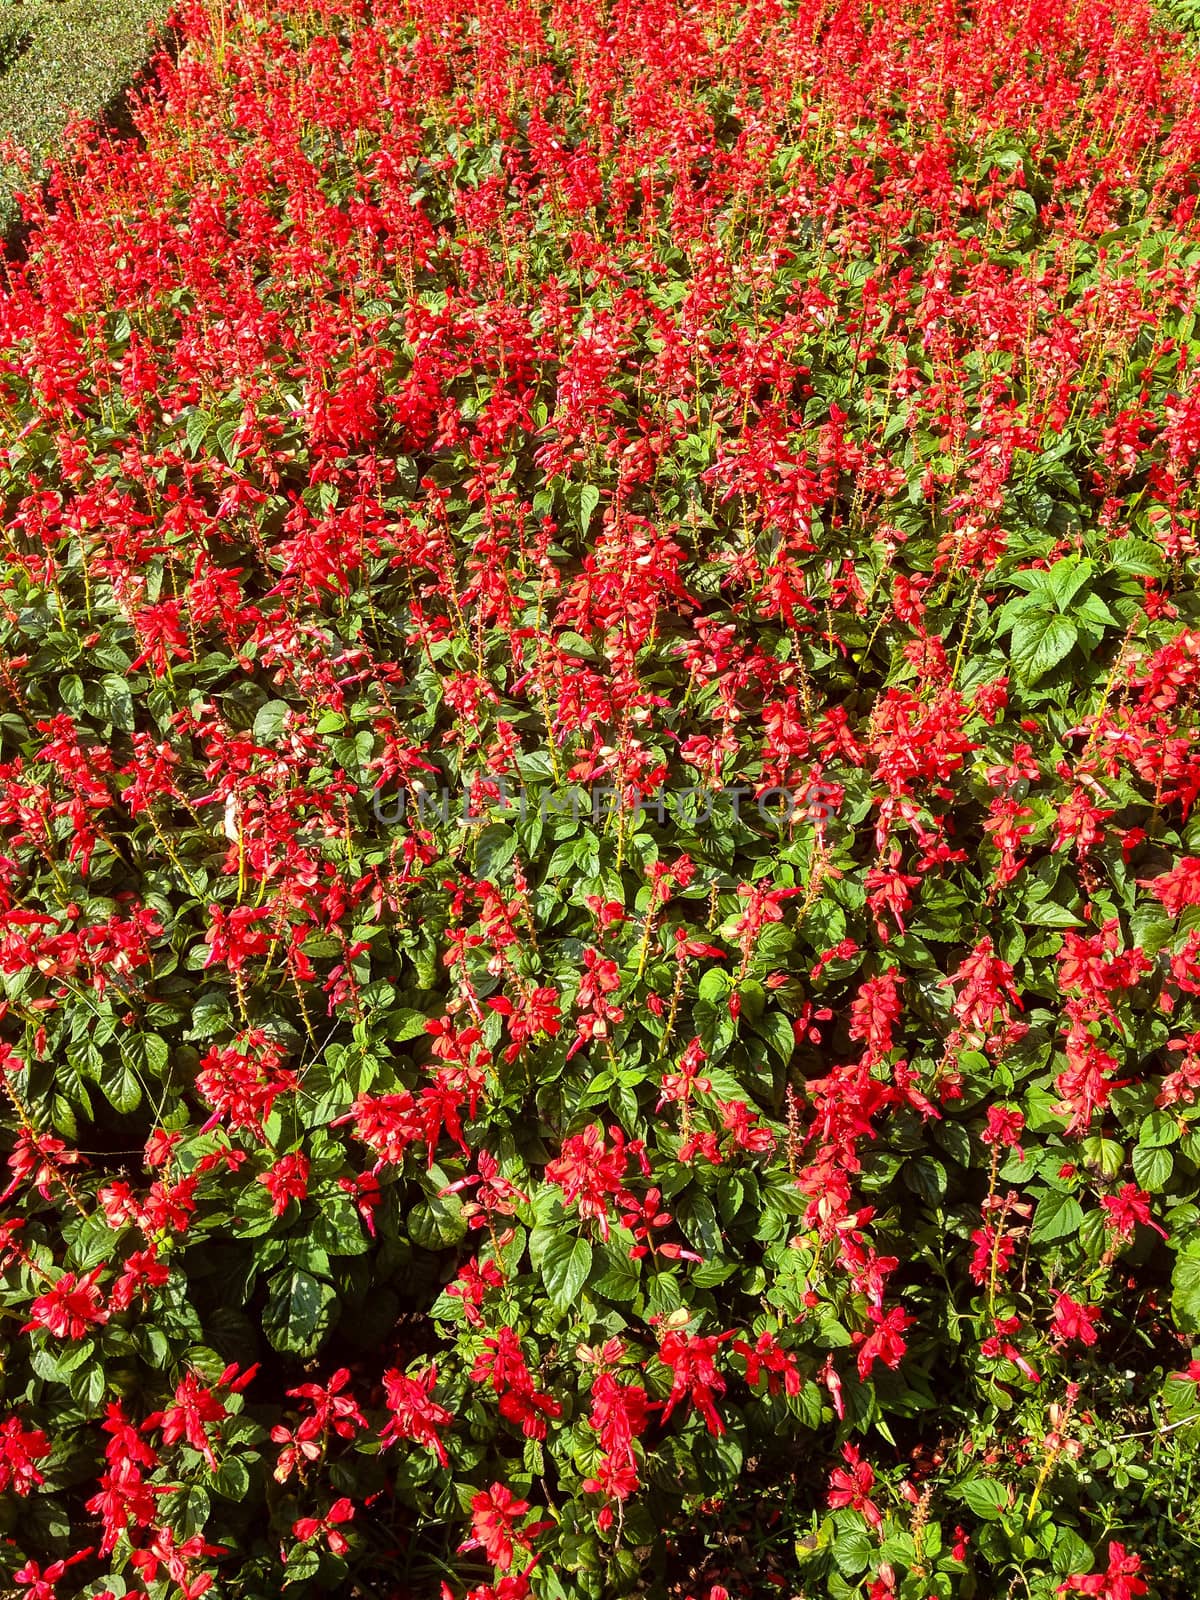 Nature view of red flowers blooming in garden under sunlight